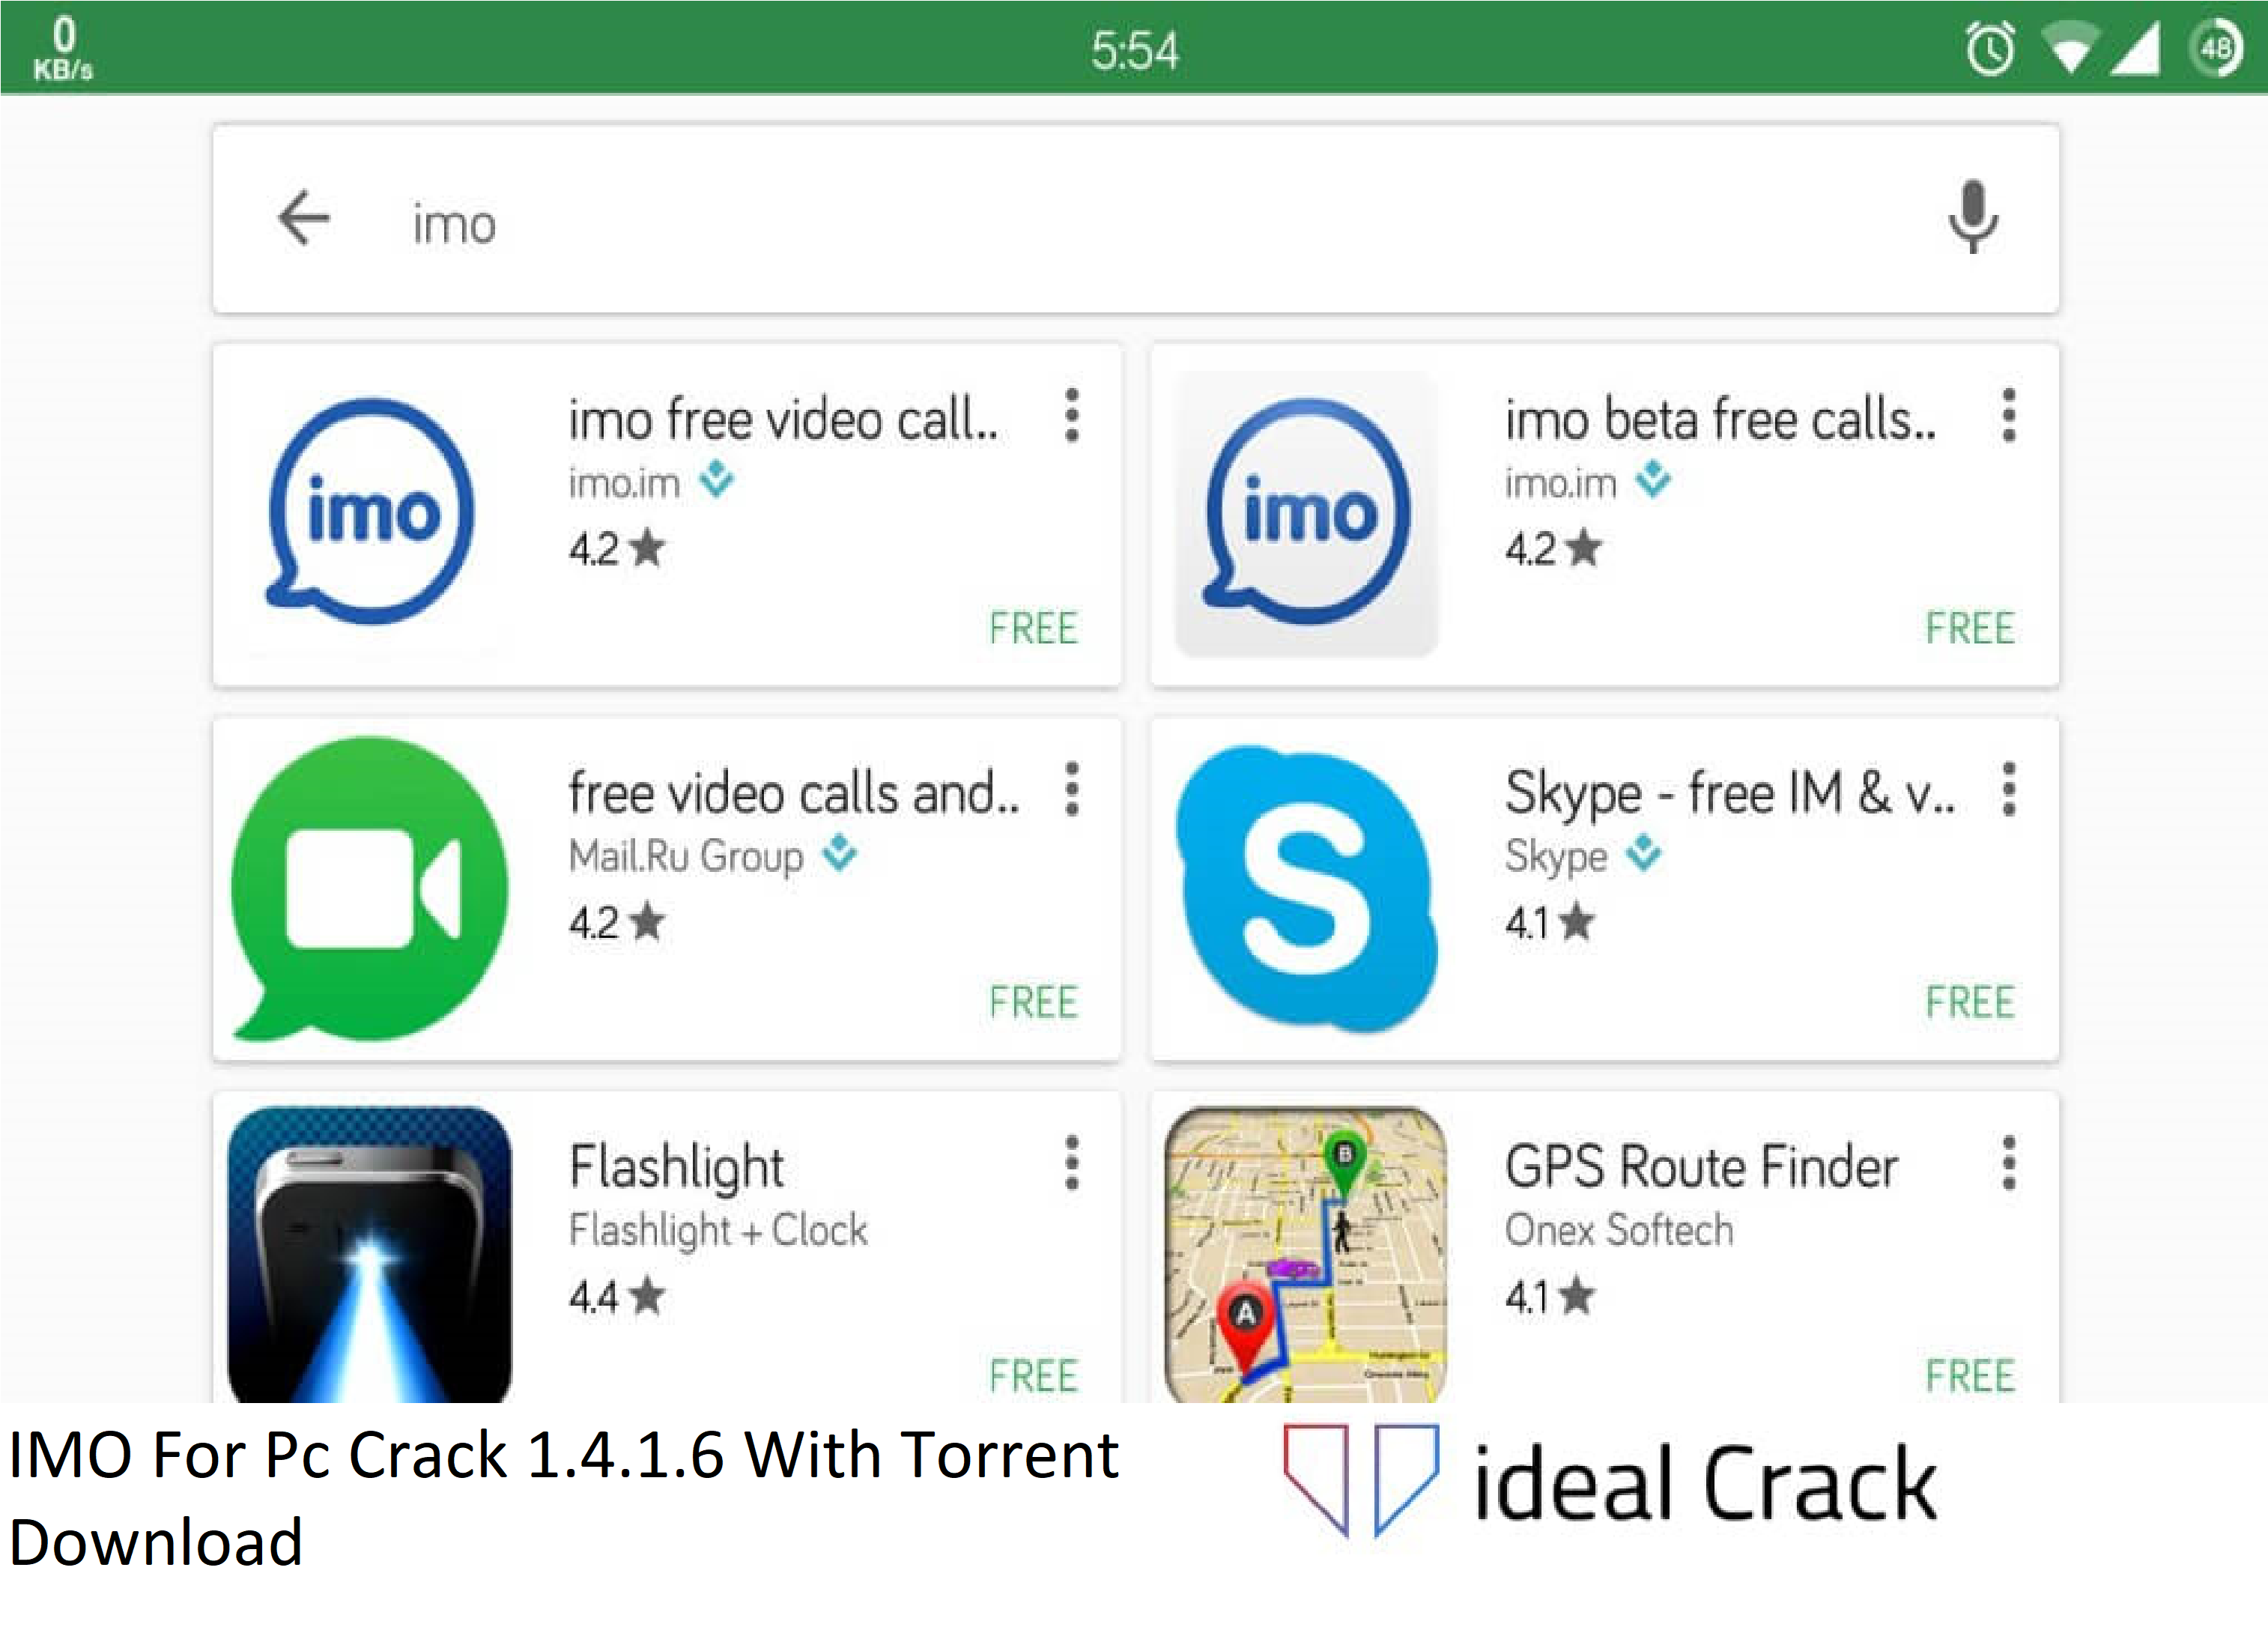 IMO For Pc Crack 1.4.1.6 With Torrent Download